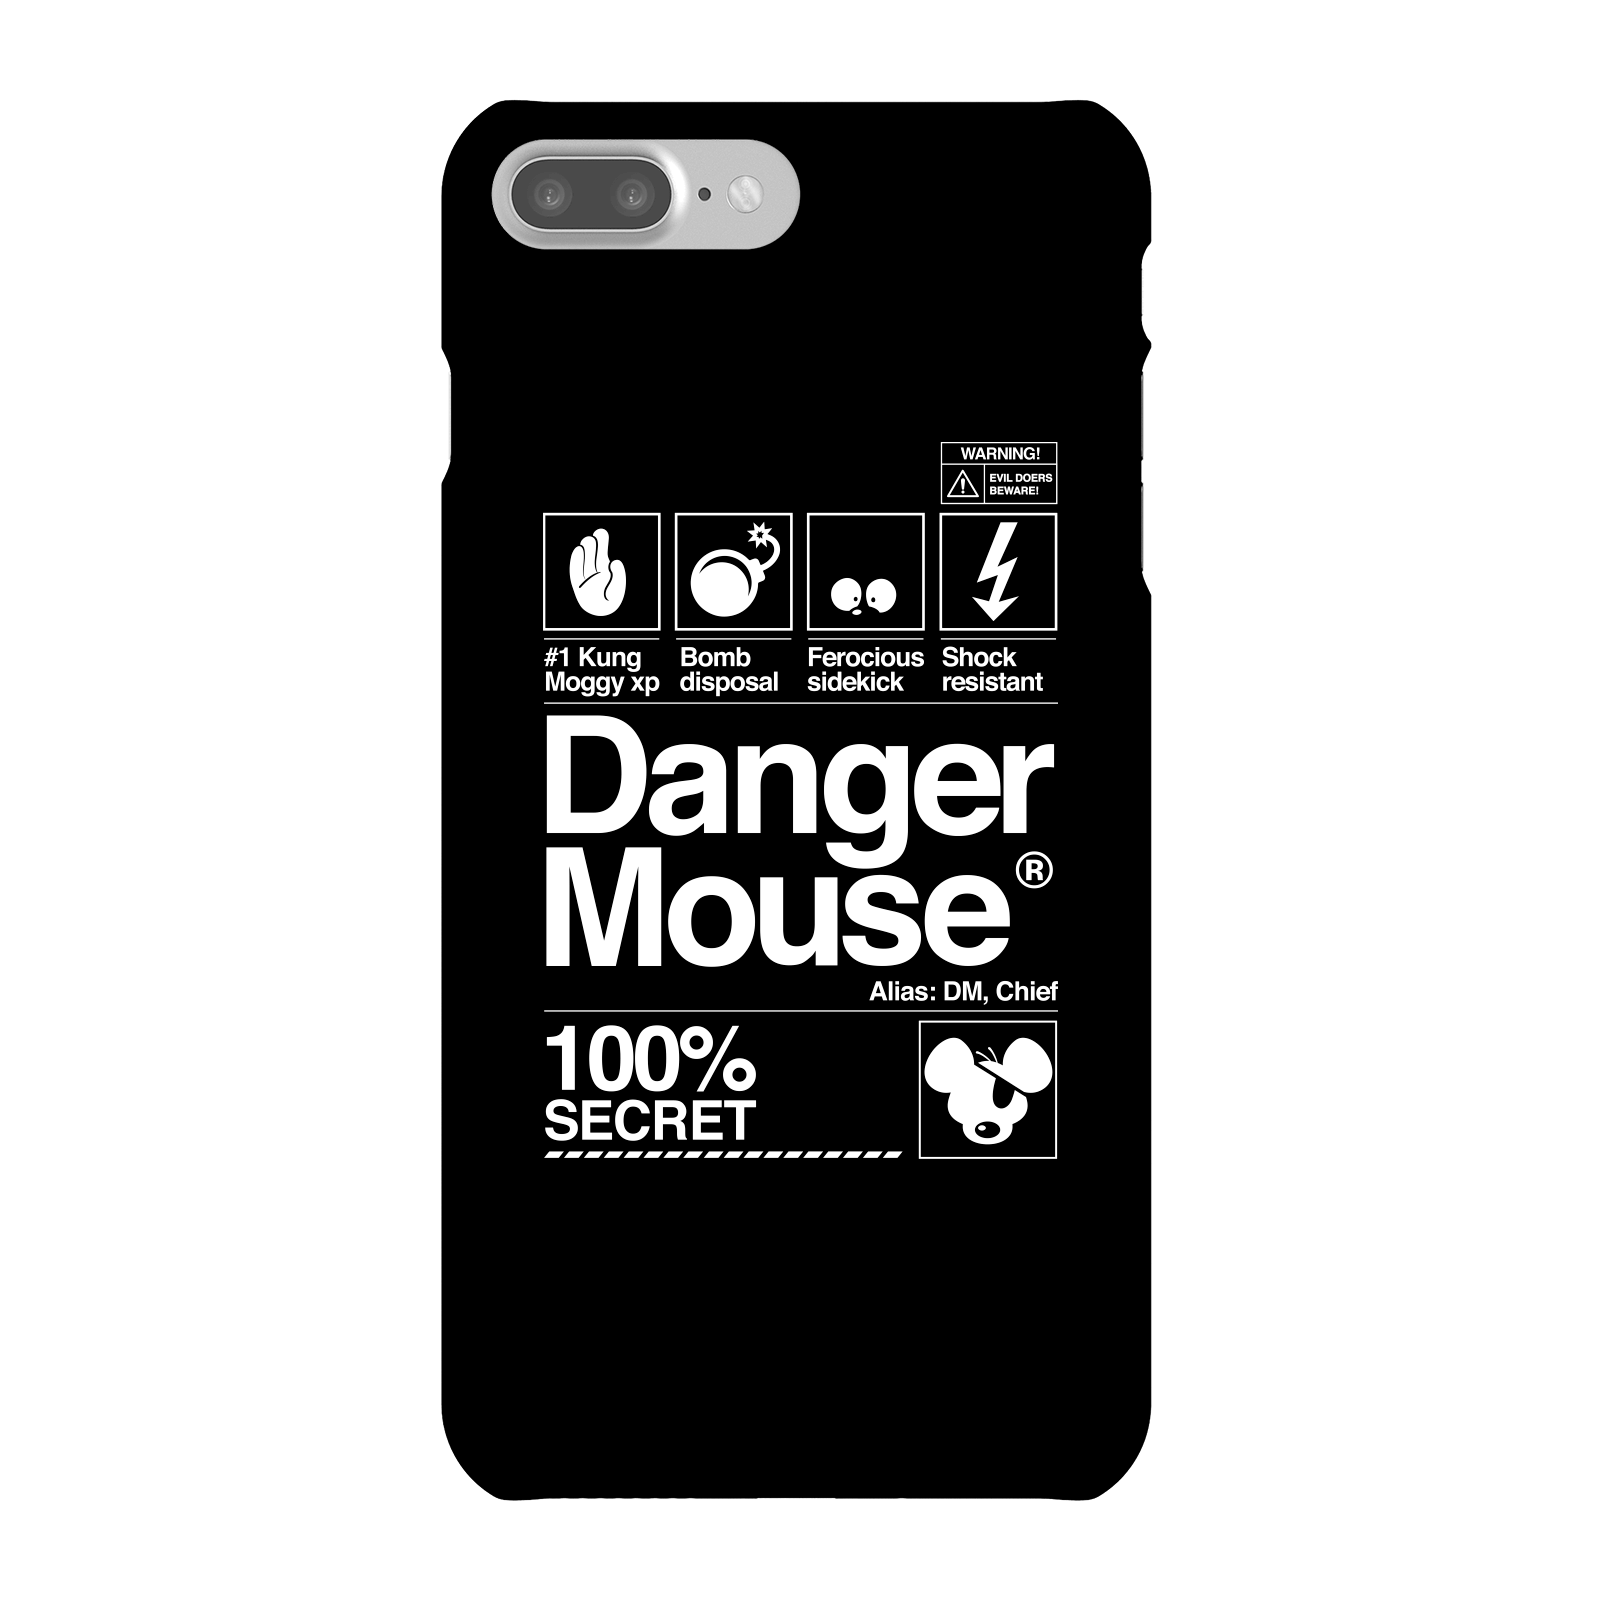 Danger Mouse 100% Secret Phone Case for iPhone and Android - iPhone 7 Plus - Snap Case - Matte